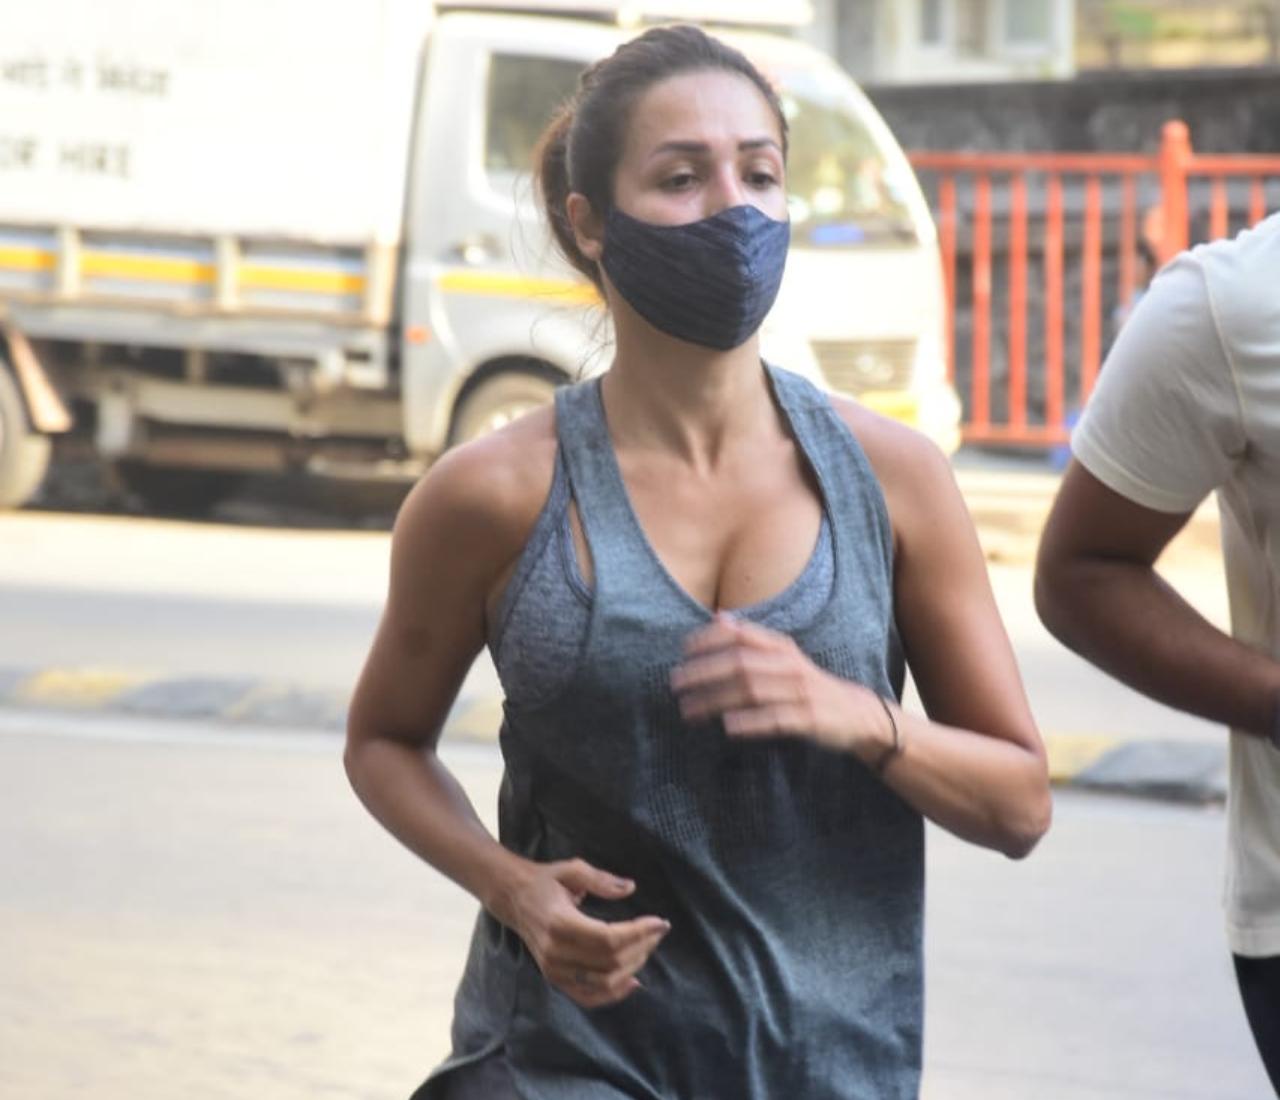 Malaika Arora had a busy day in office. In the morning, the 47-year-old diva was snapped burning her calories on the streets of Bandra, Mumbai. (All pictures: Yogen Shah).